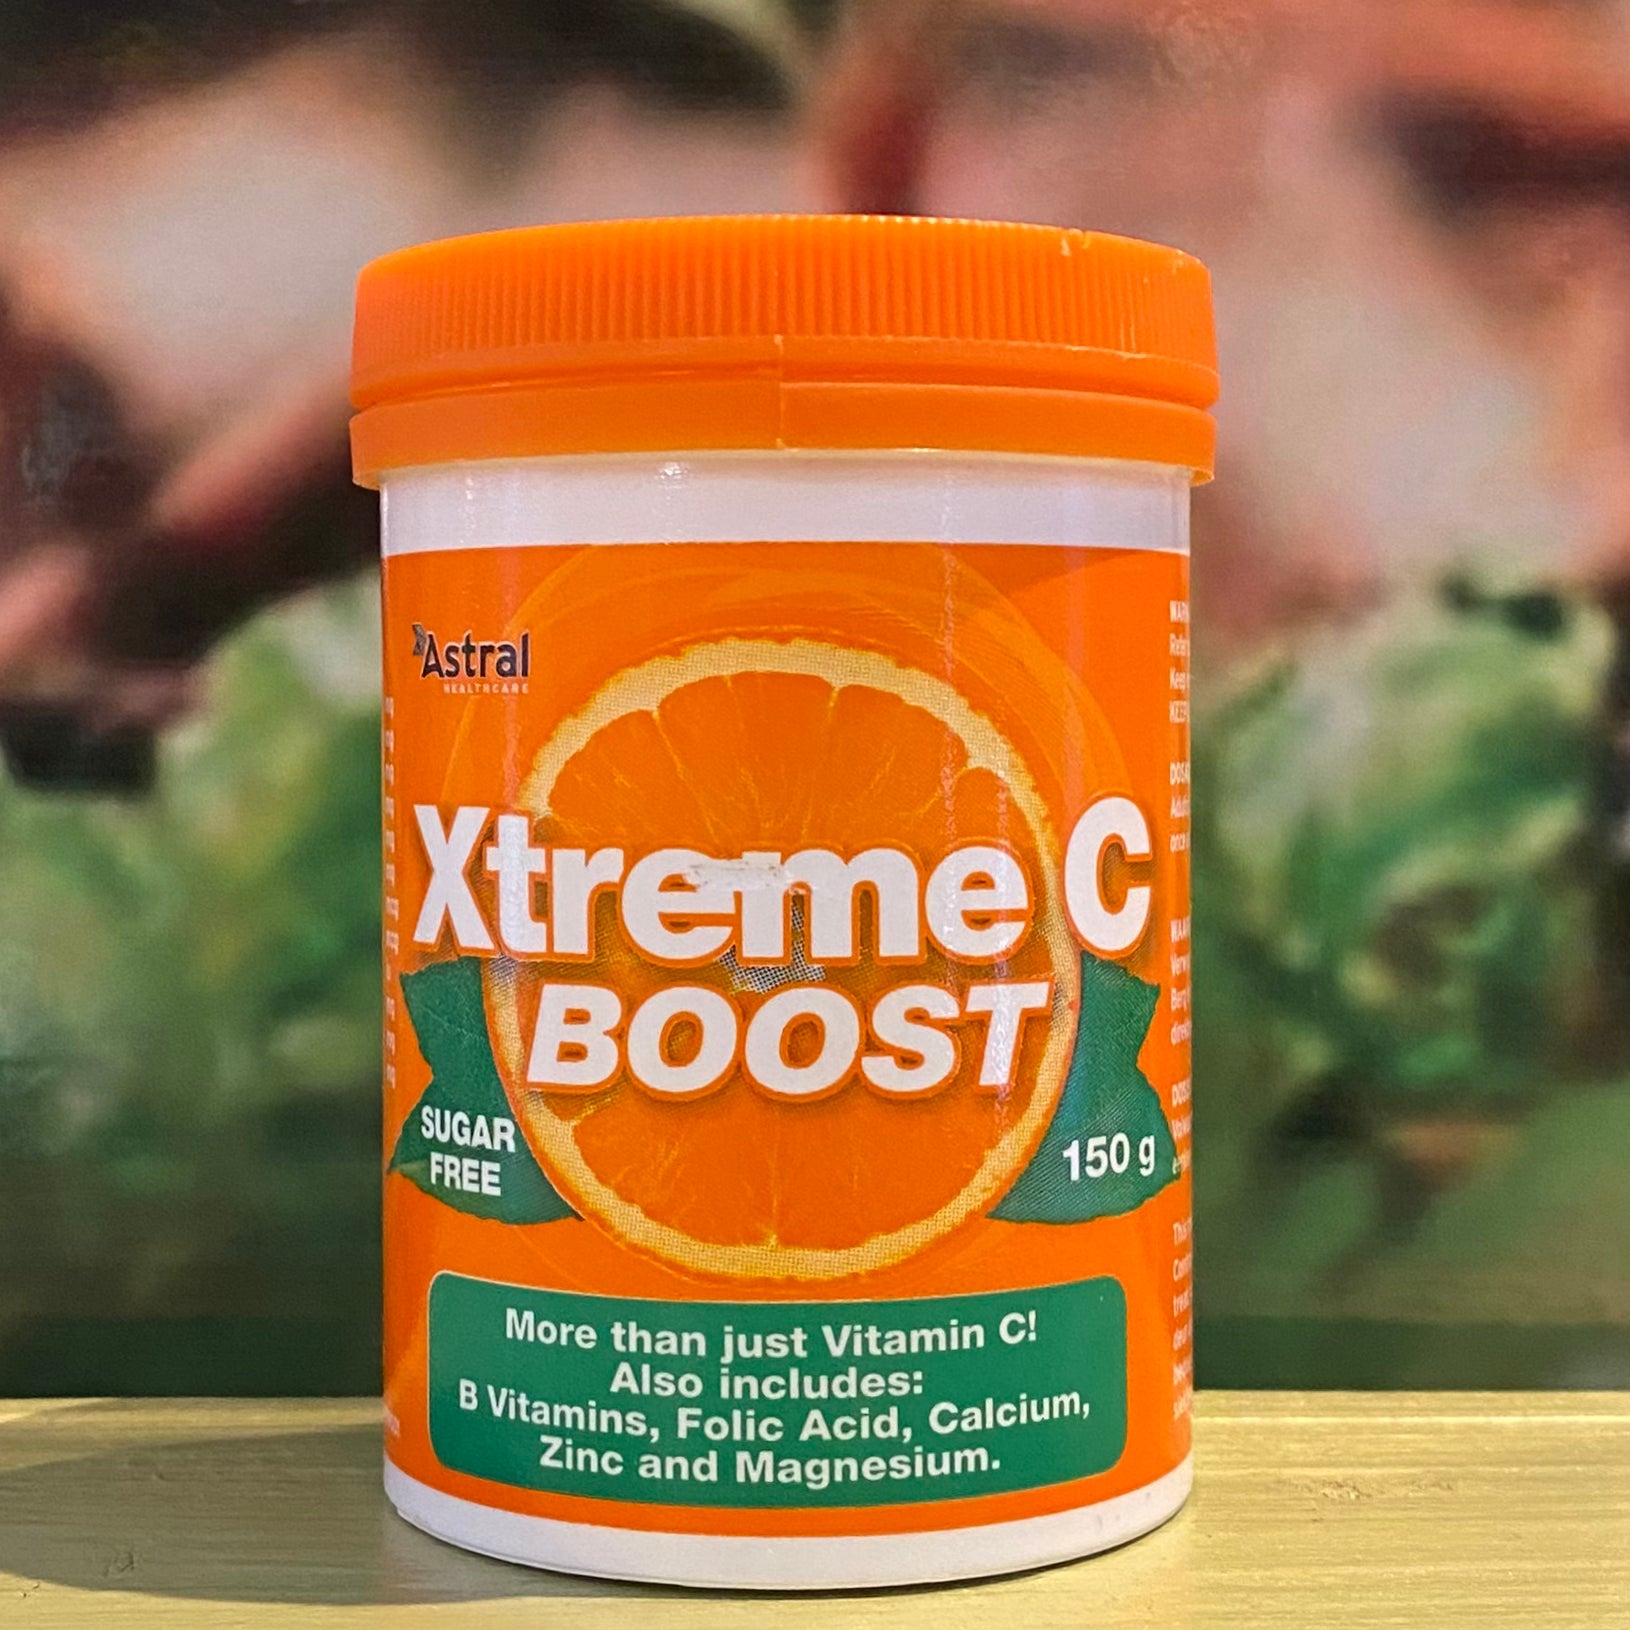 Astral Xtreme C Boost 150g